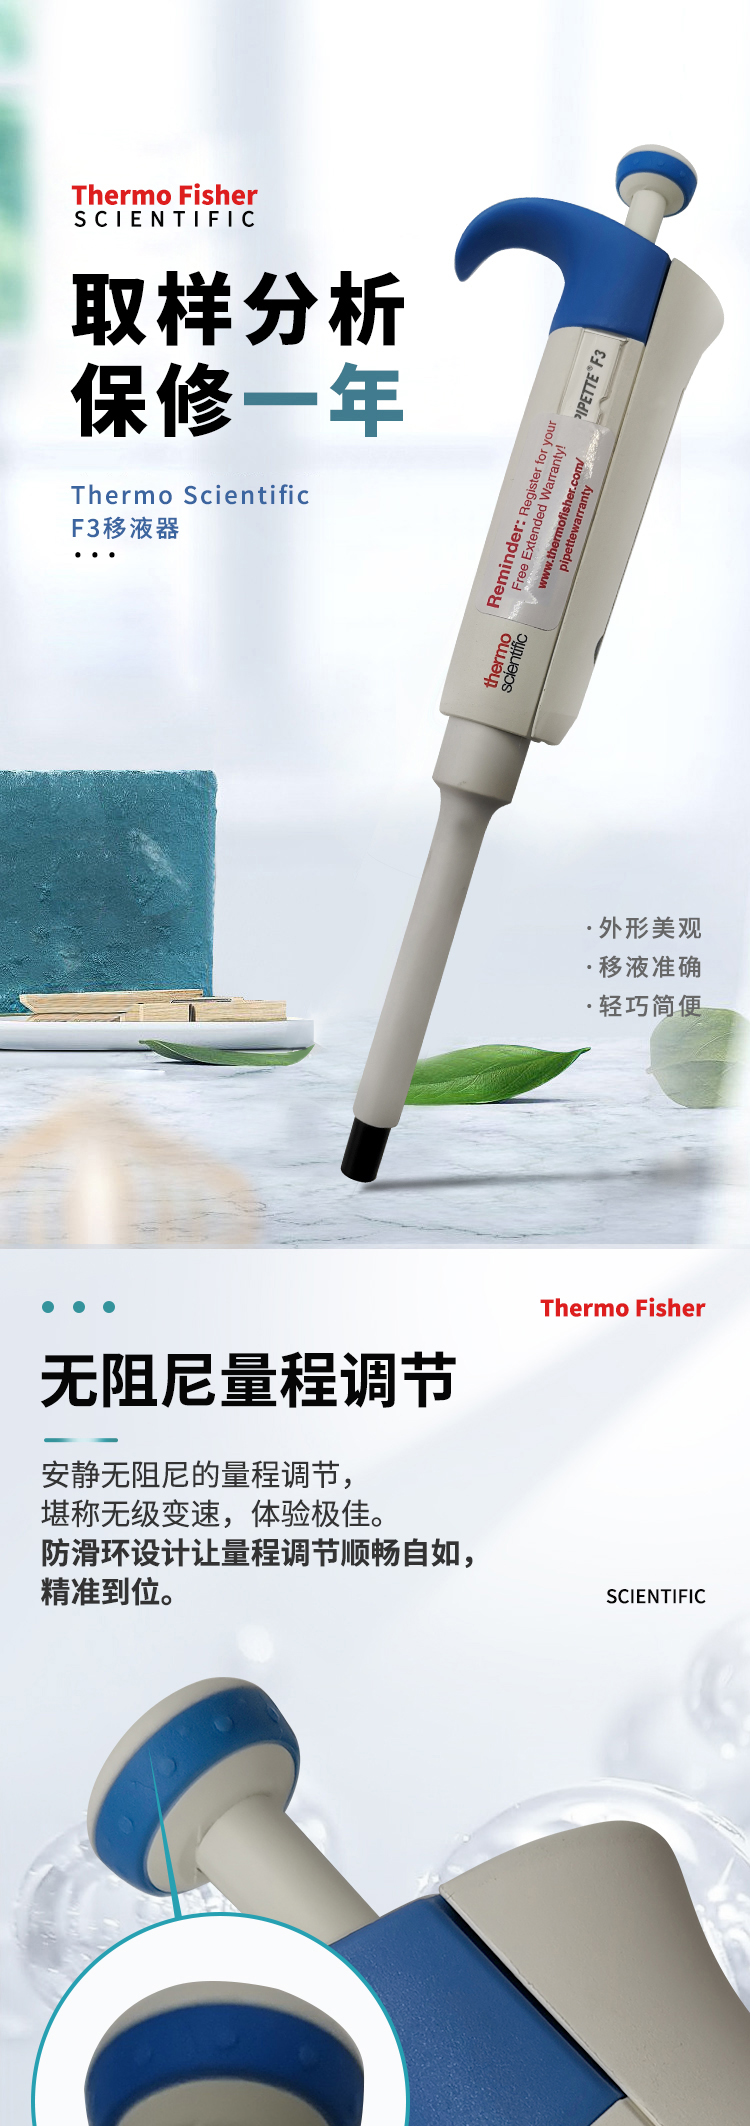 Thermo Fisher Scient フィンピペット デジタル （容量可変式） 4500110 通販